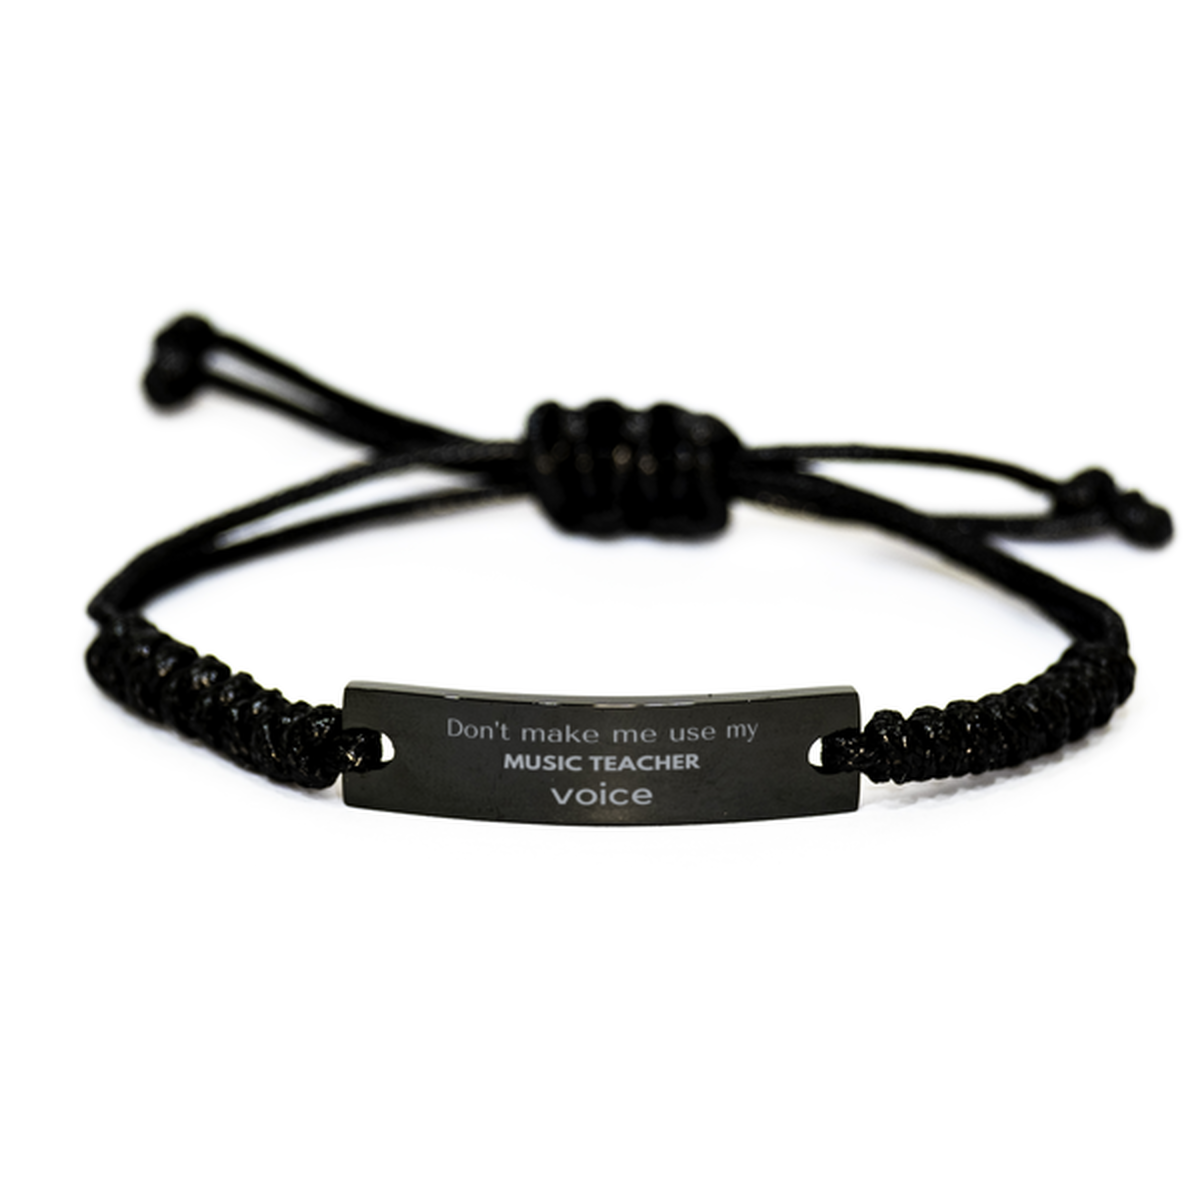 Don't make me use my Music Teacher voice, Sarcasm Music Teacher Gifts, Christmas Music Teacher Black Rope Bracelet Birthday Unique Gifts For Music Teacher Coworkers, Men, Women, Colleague, Friends